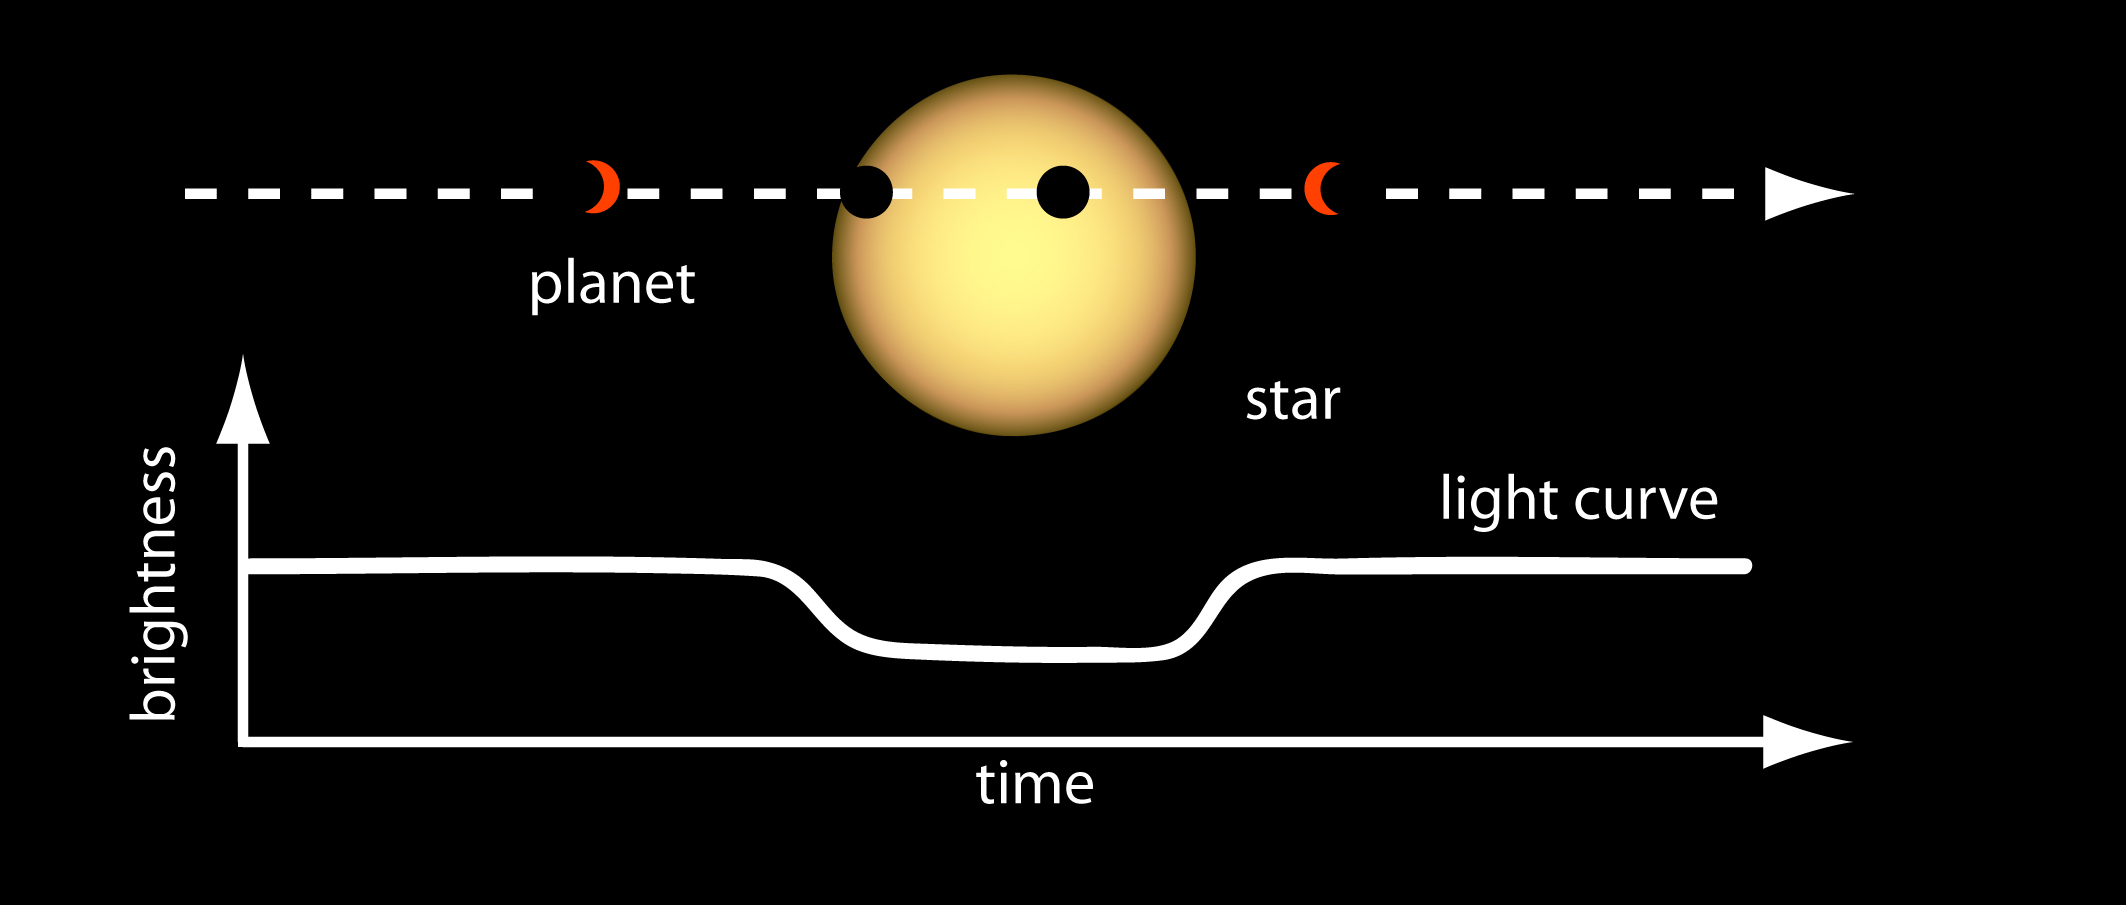 An illustration of the light curve of a planet transiting a star.